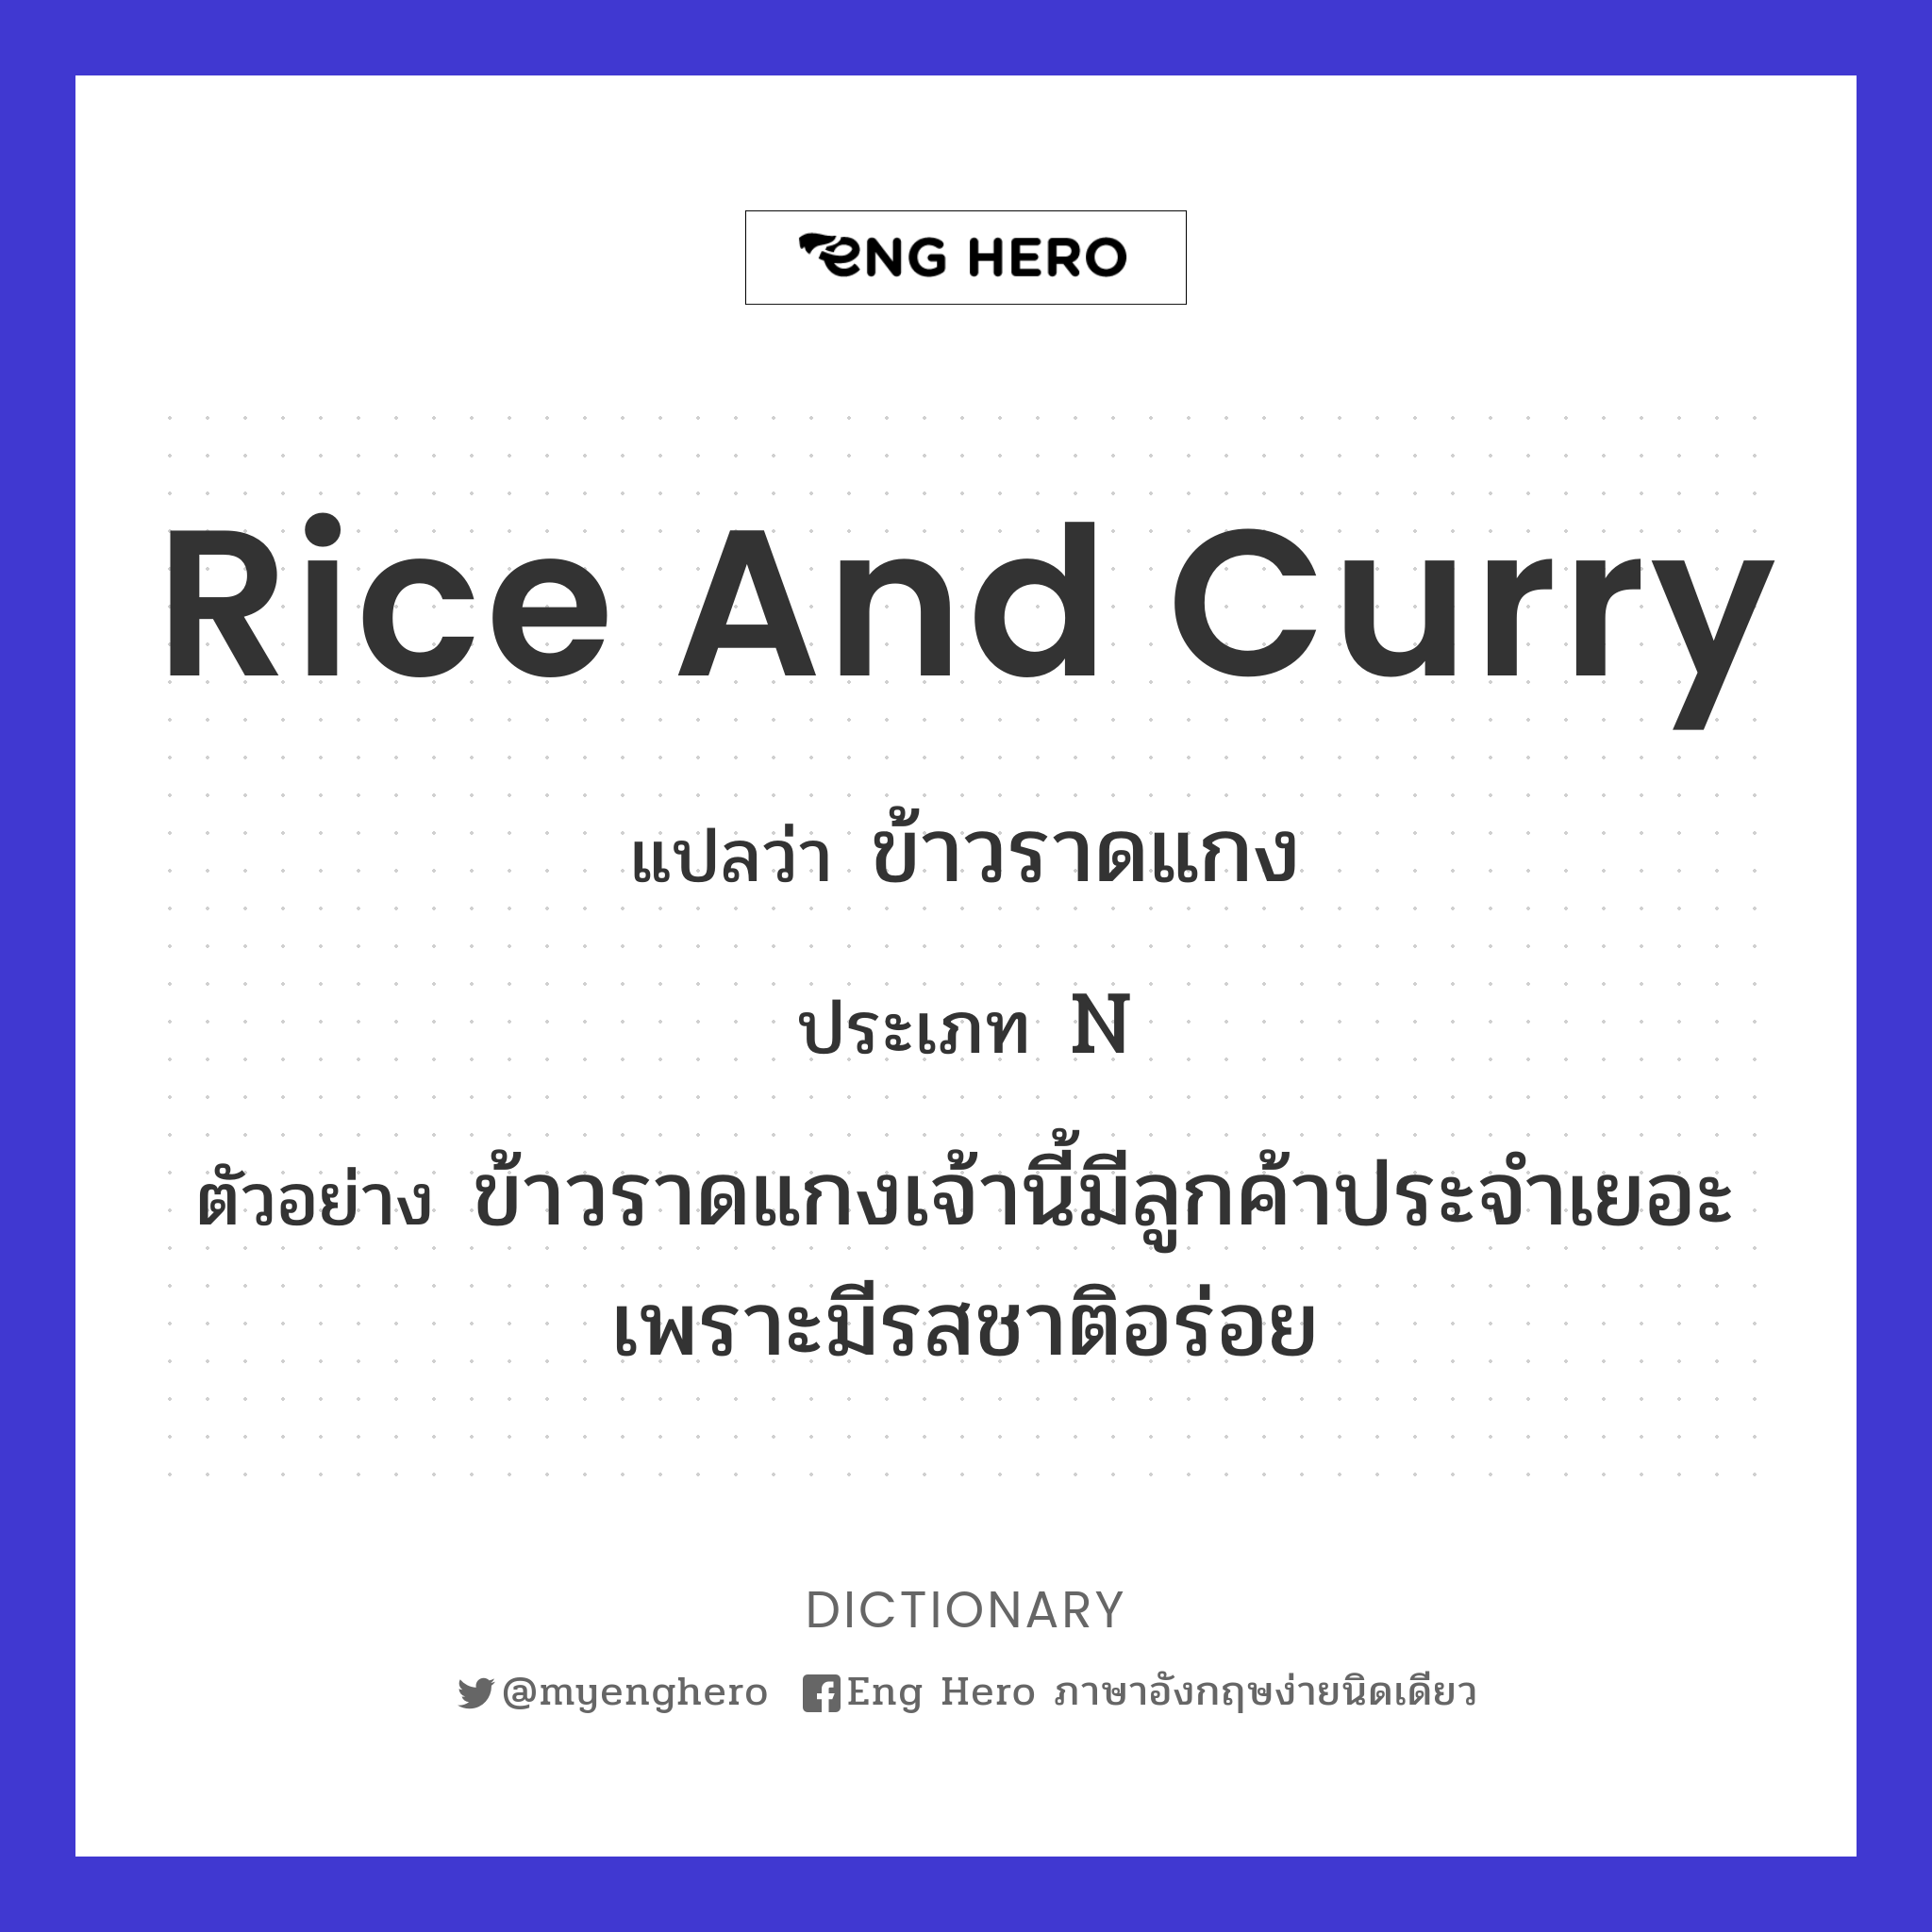 rice and curry